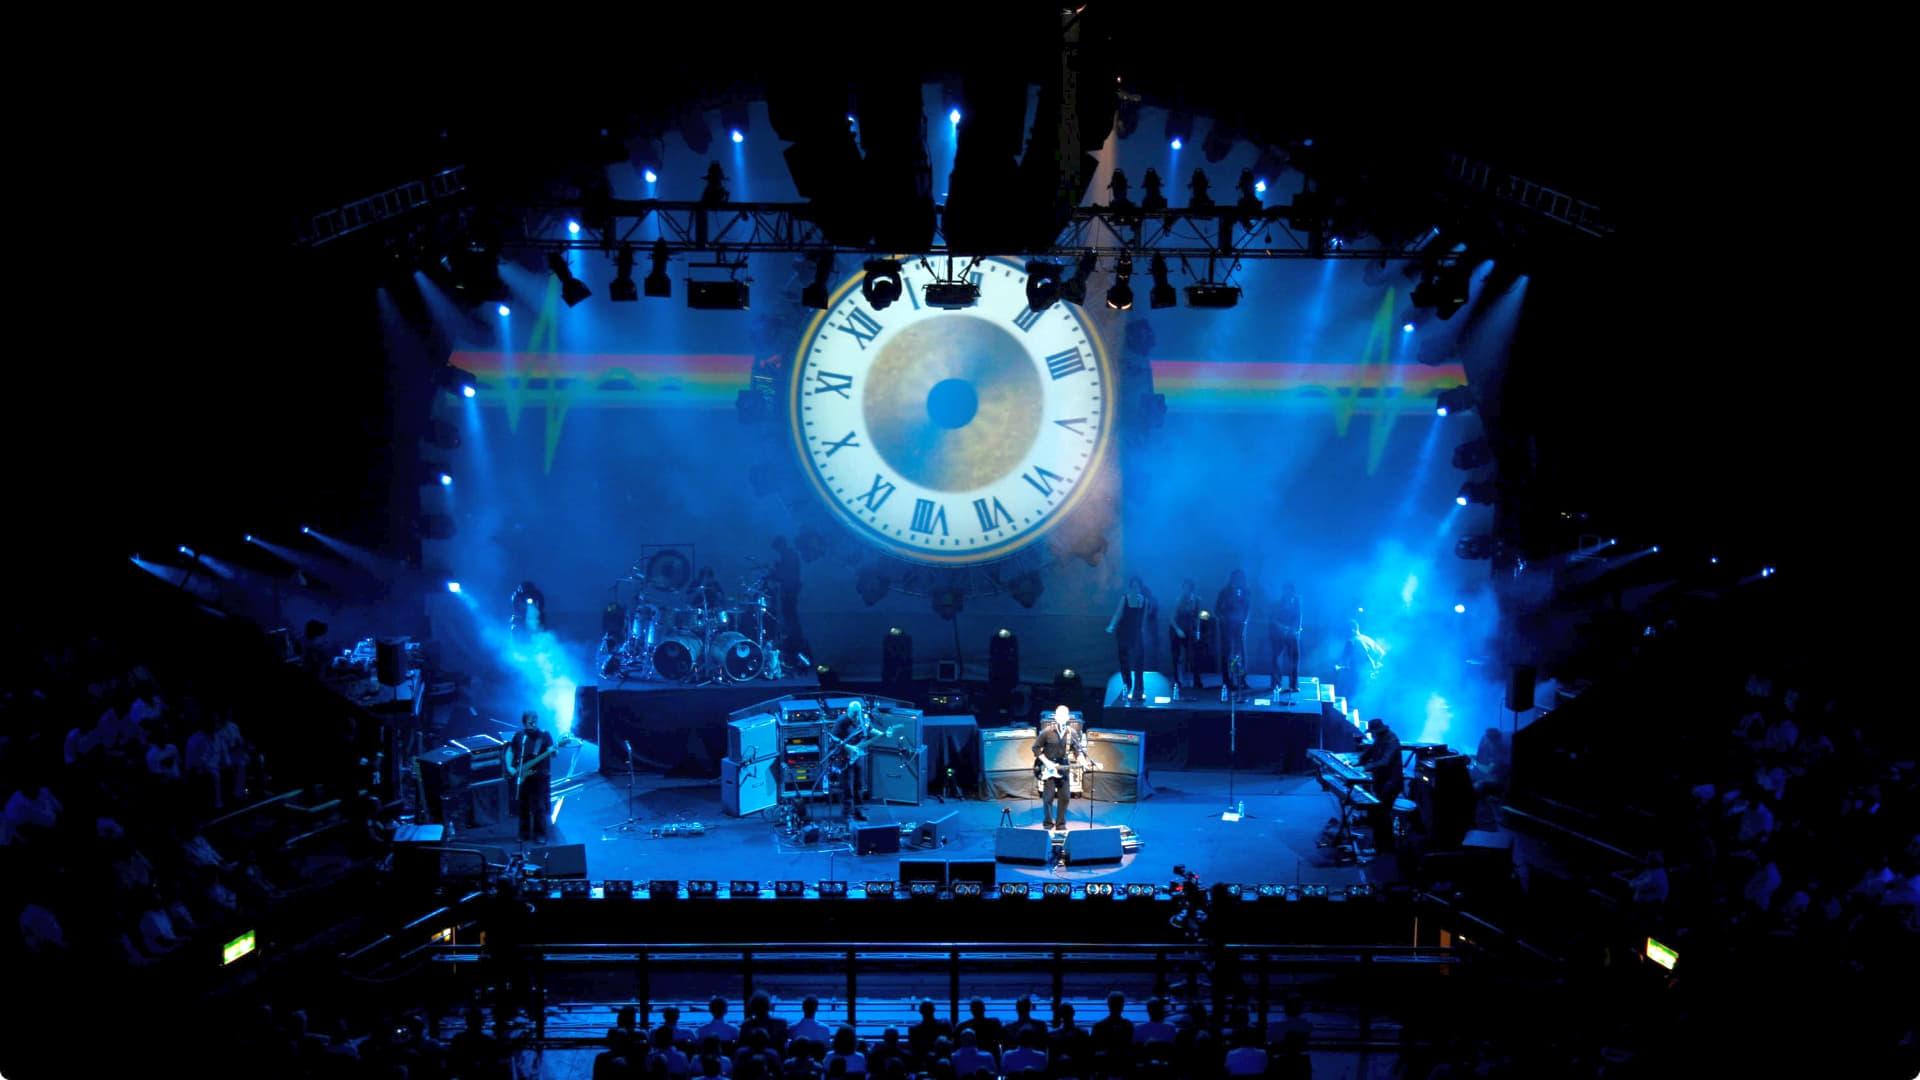 The Australian Pink Floyd Show - Live at the Hammersmith Apollo backdrop